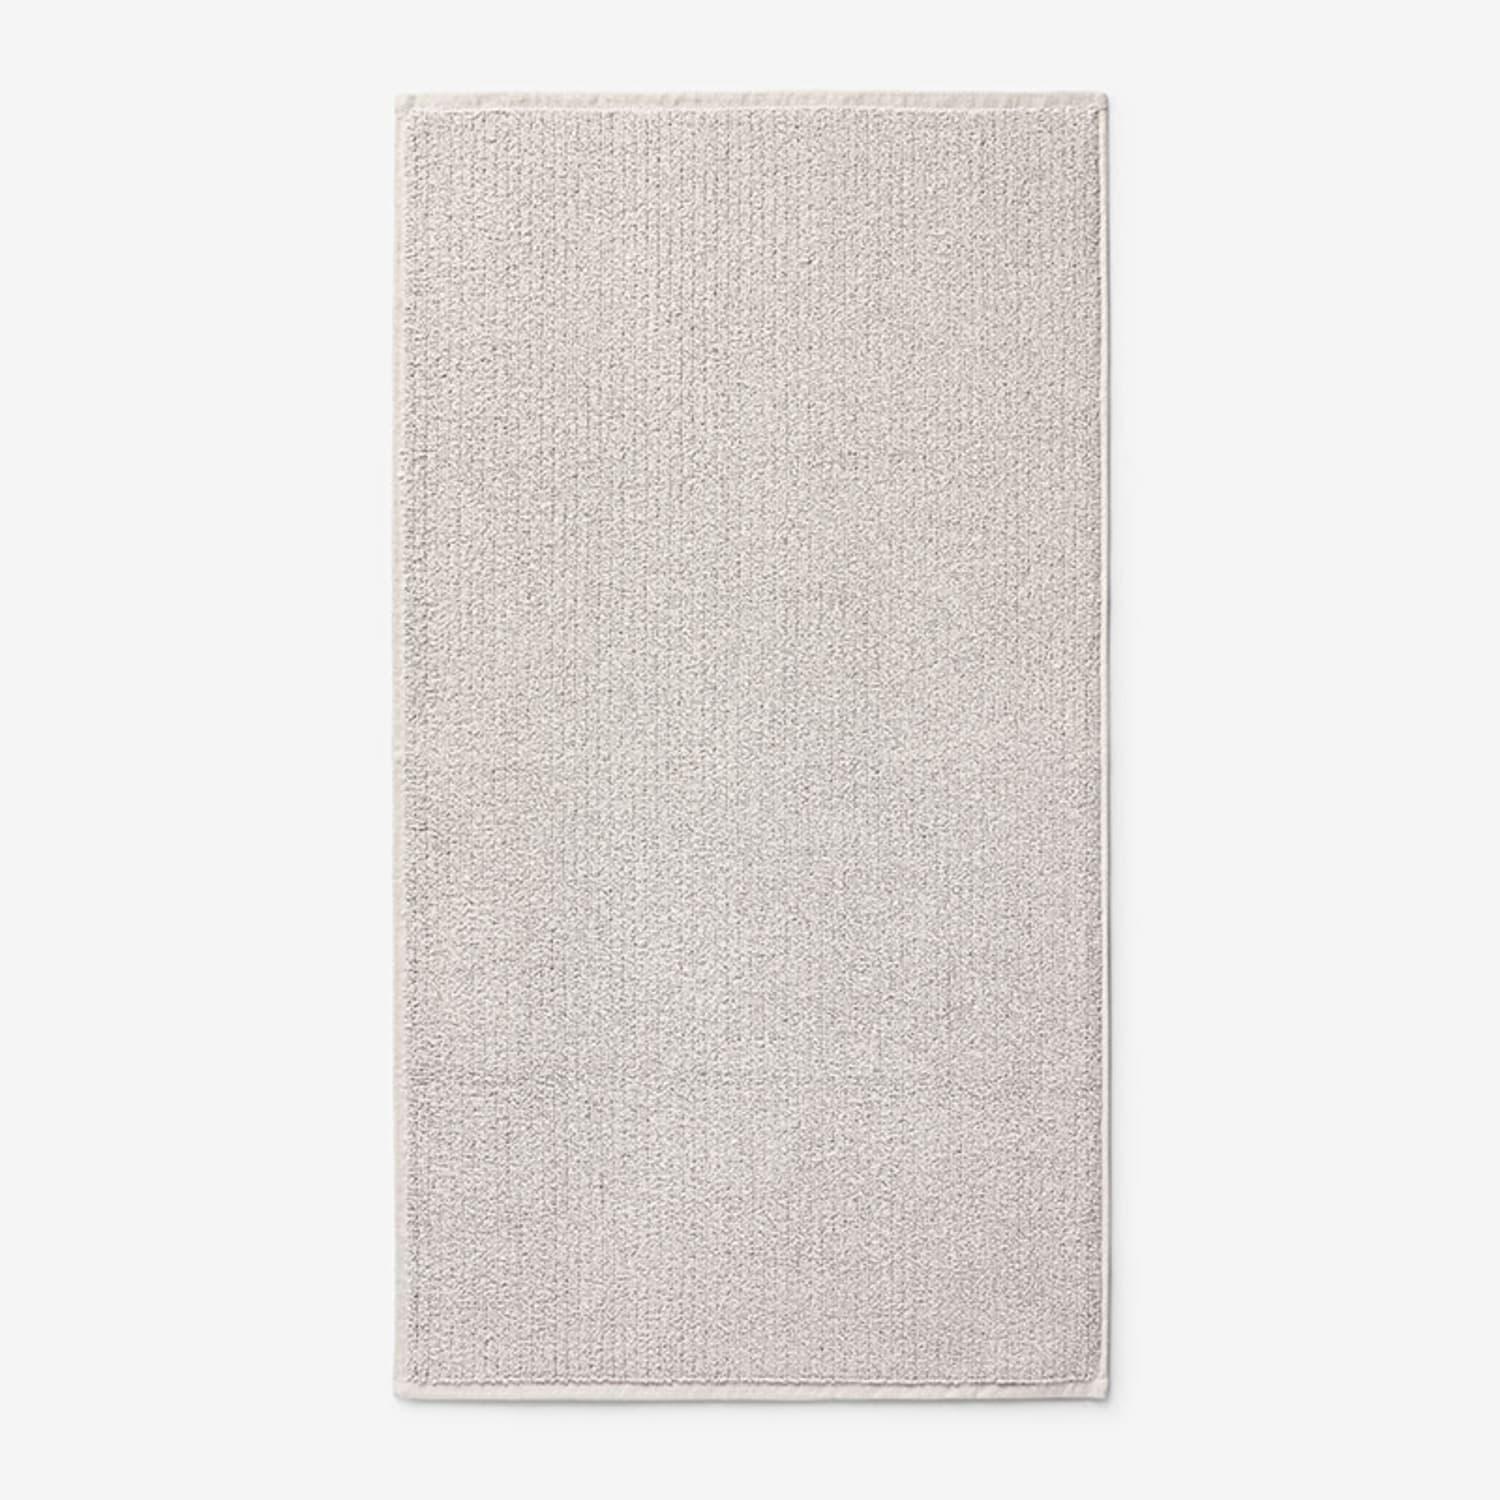 Green Earth® Quick Dry Bath Mat by Micro Cotton® | The Company Store